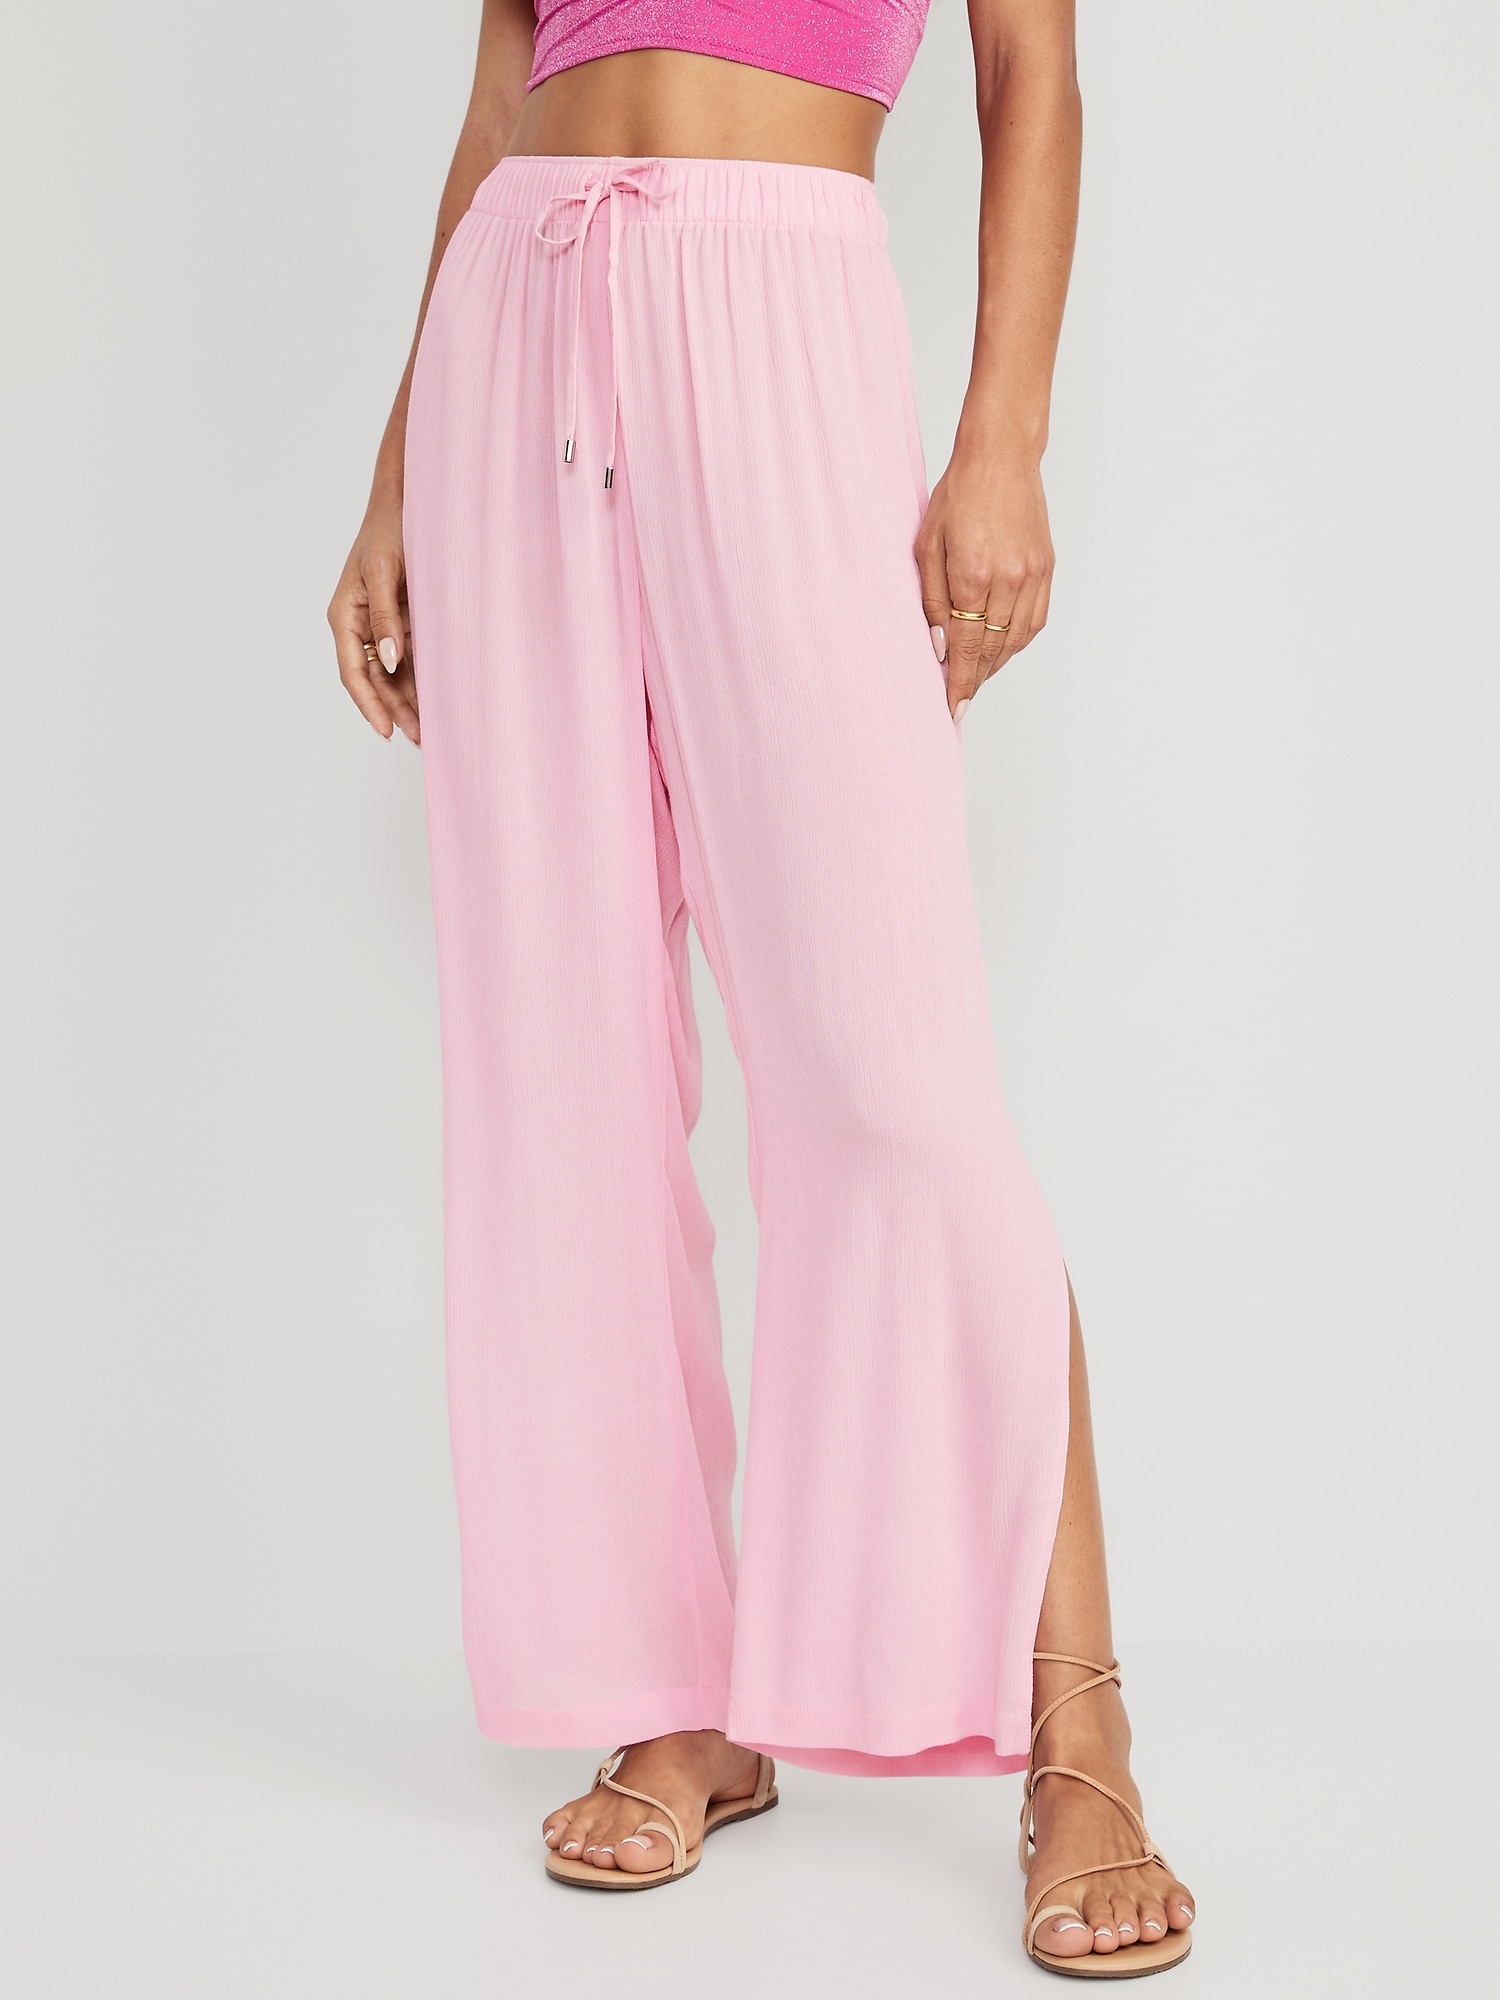 Old Navy High-Waisted Lightweight Wide-Leg Cover-Up Pants for Women pink. 1